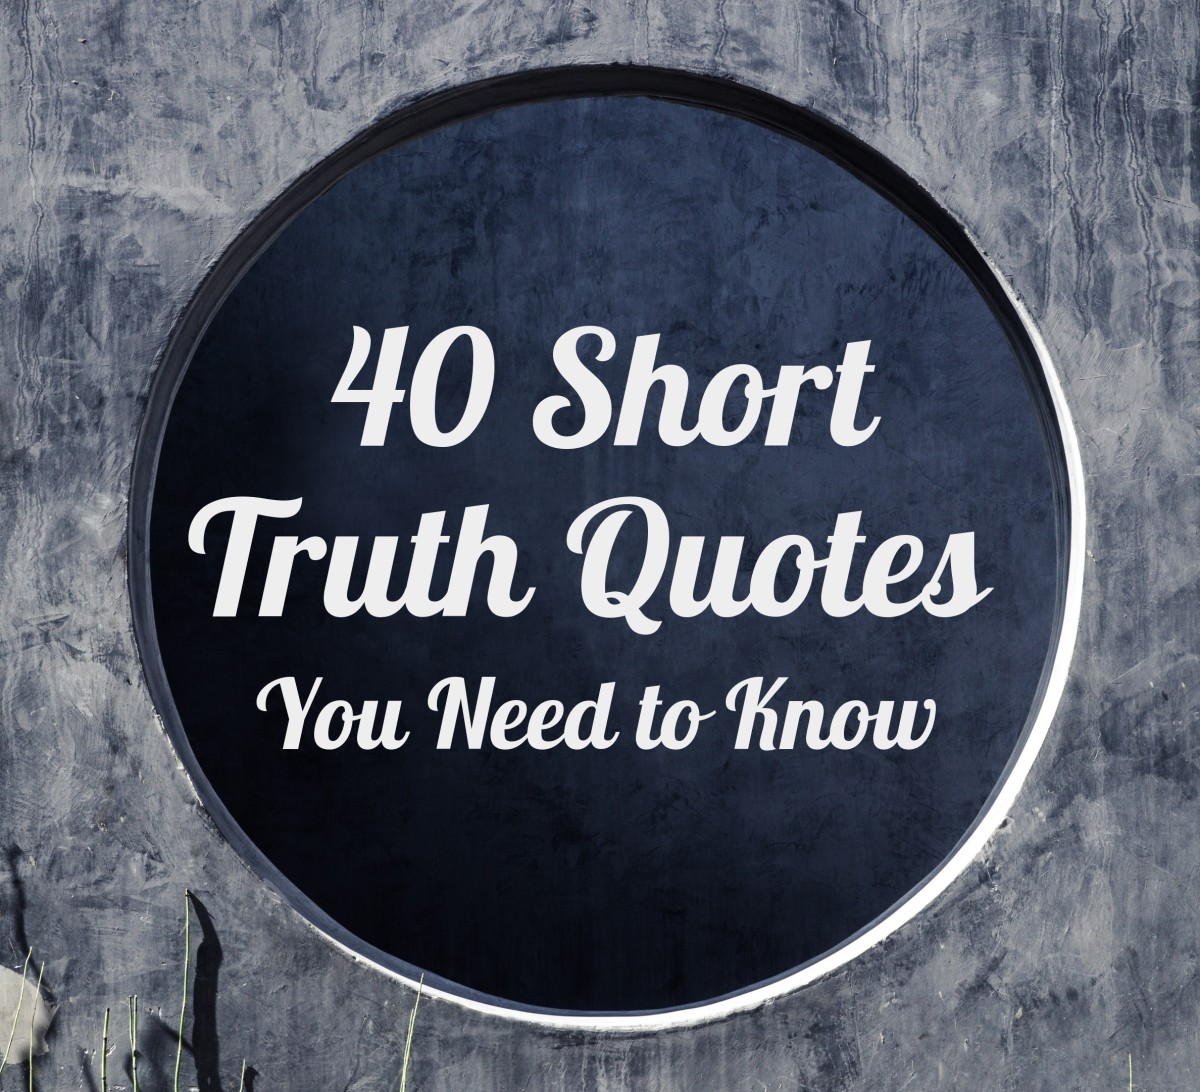 These 40 short truth quotes invite us to revisit the noble stance of telling the truth.